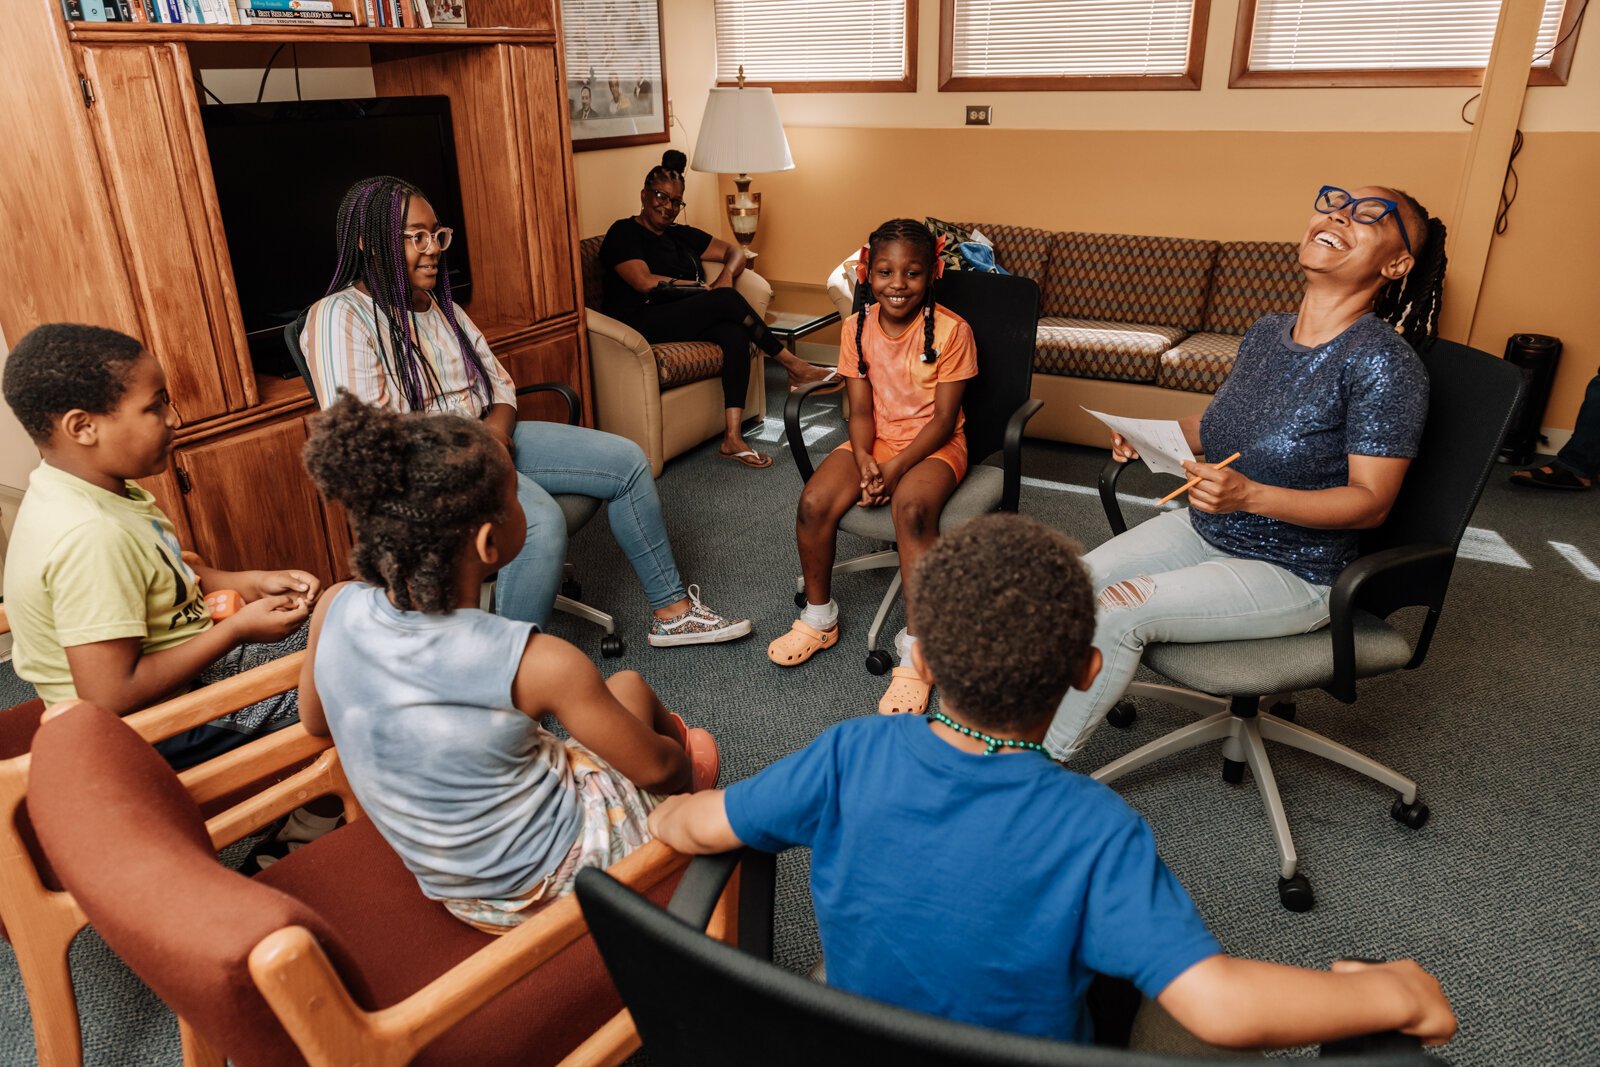 Alle Wims of Brain Geeks Learn educational services leads her students in a competitive counting game during a private tutoring session at PENTA Center, 2513 S. Calhoun St.